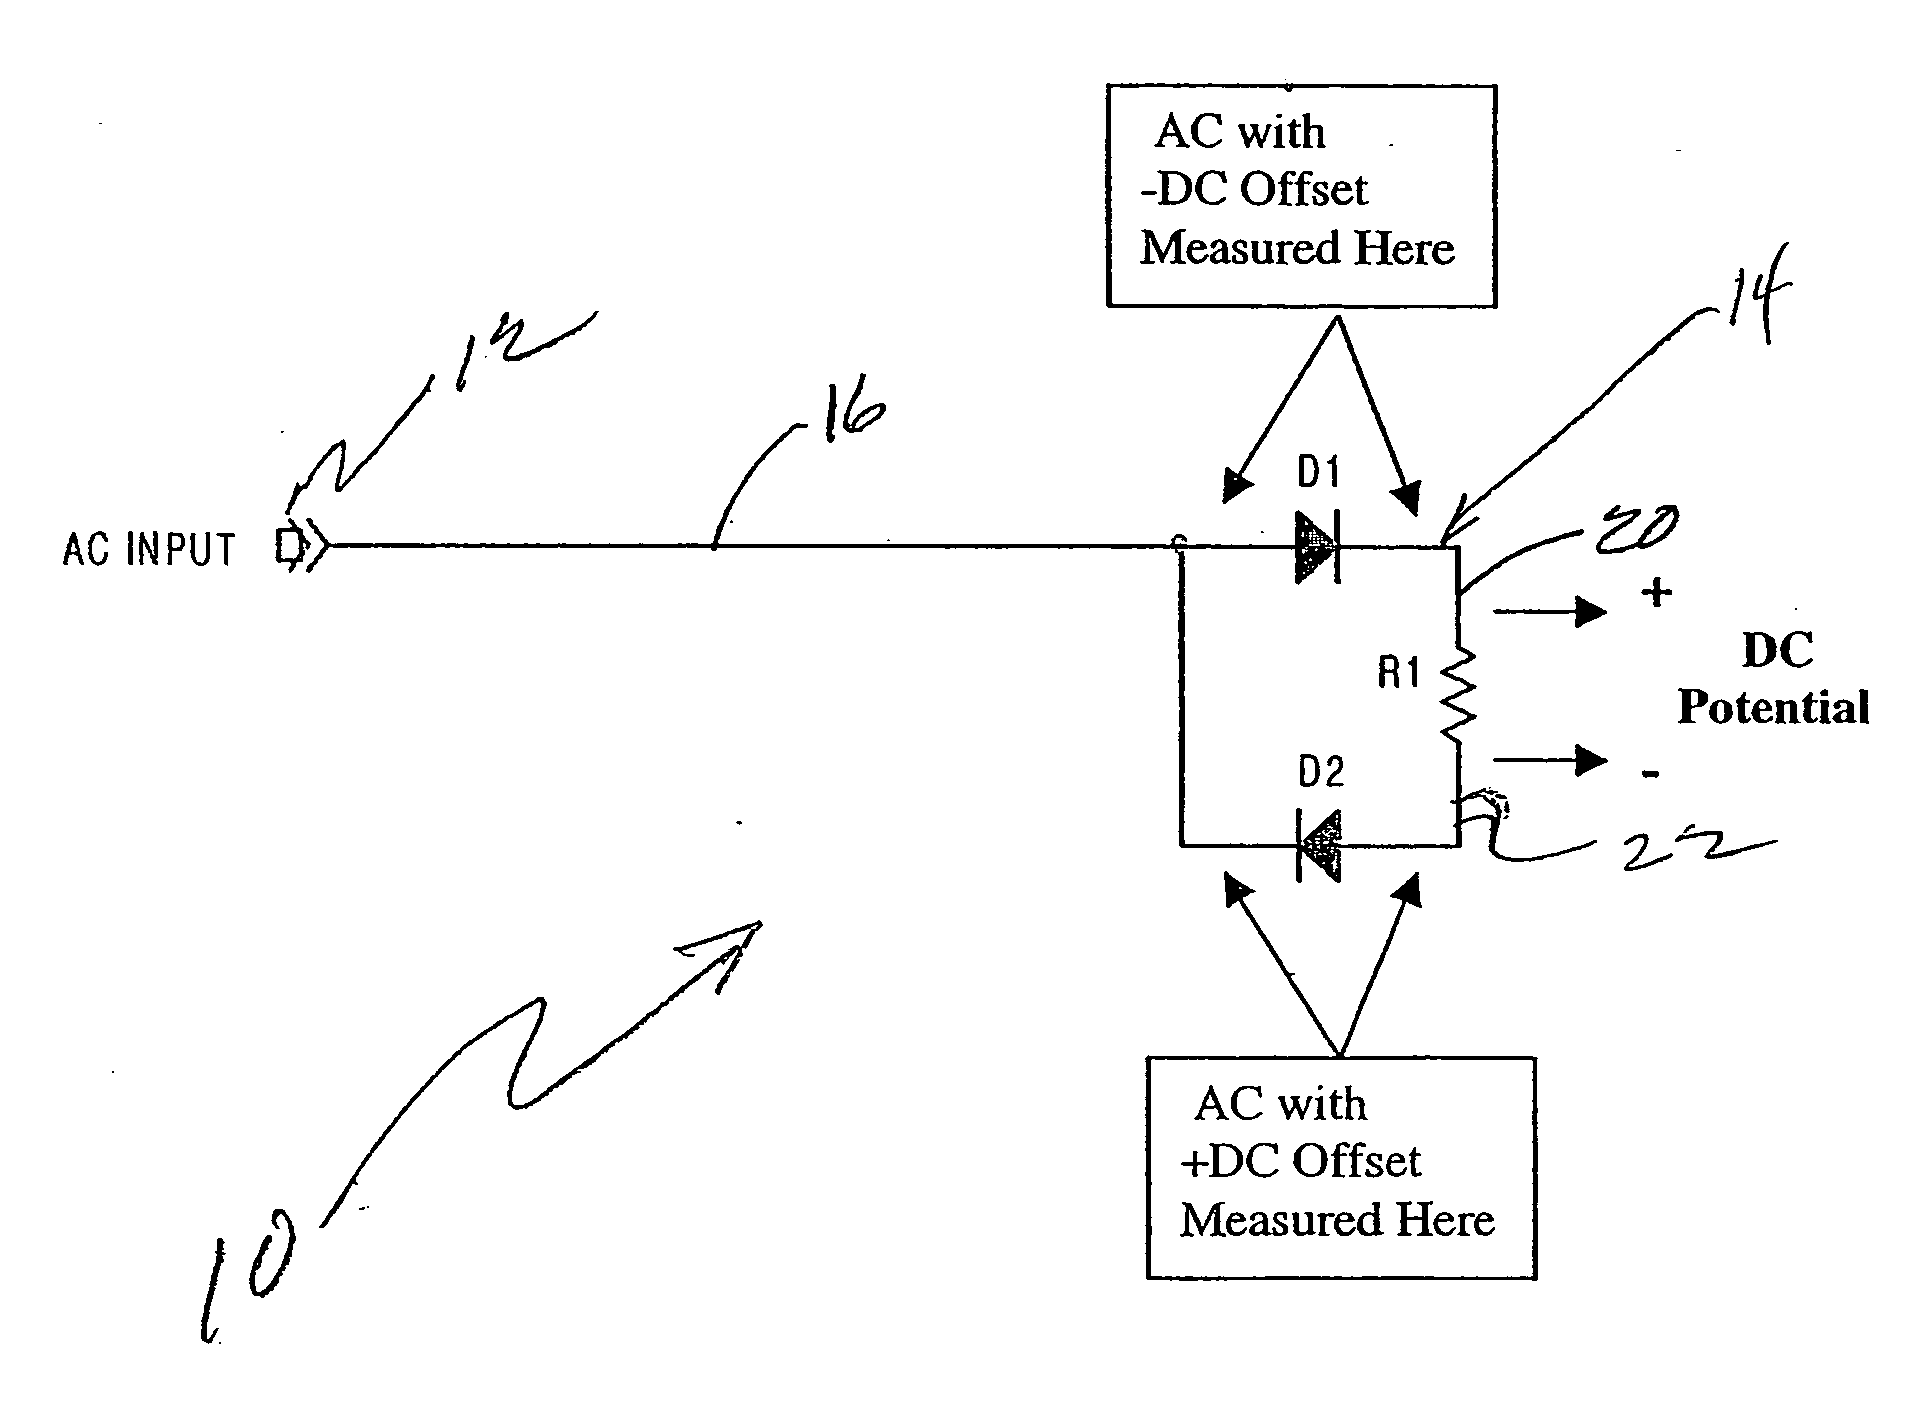 One wire self referencing circuits for providing power and data